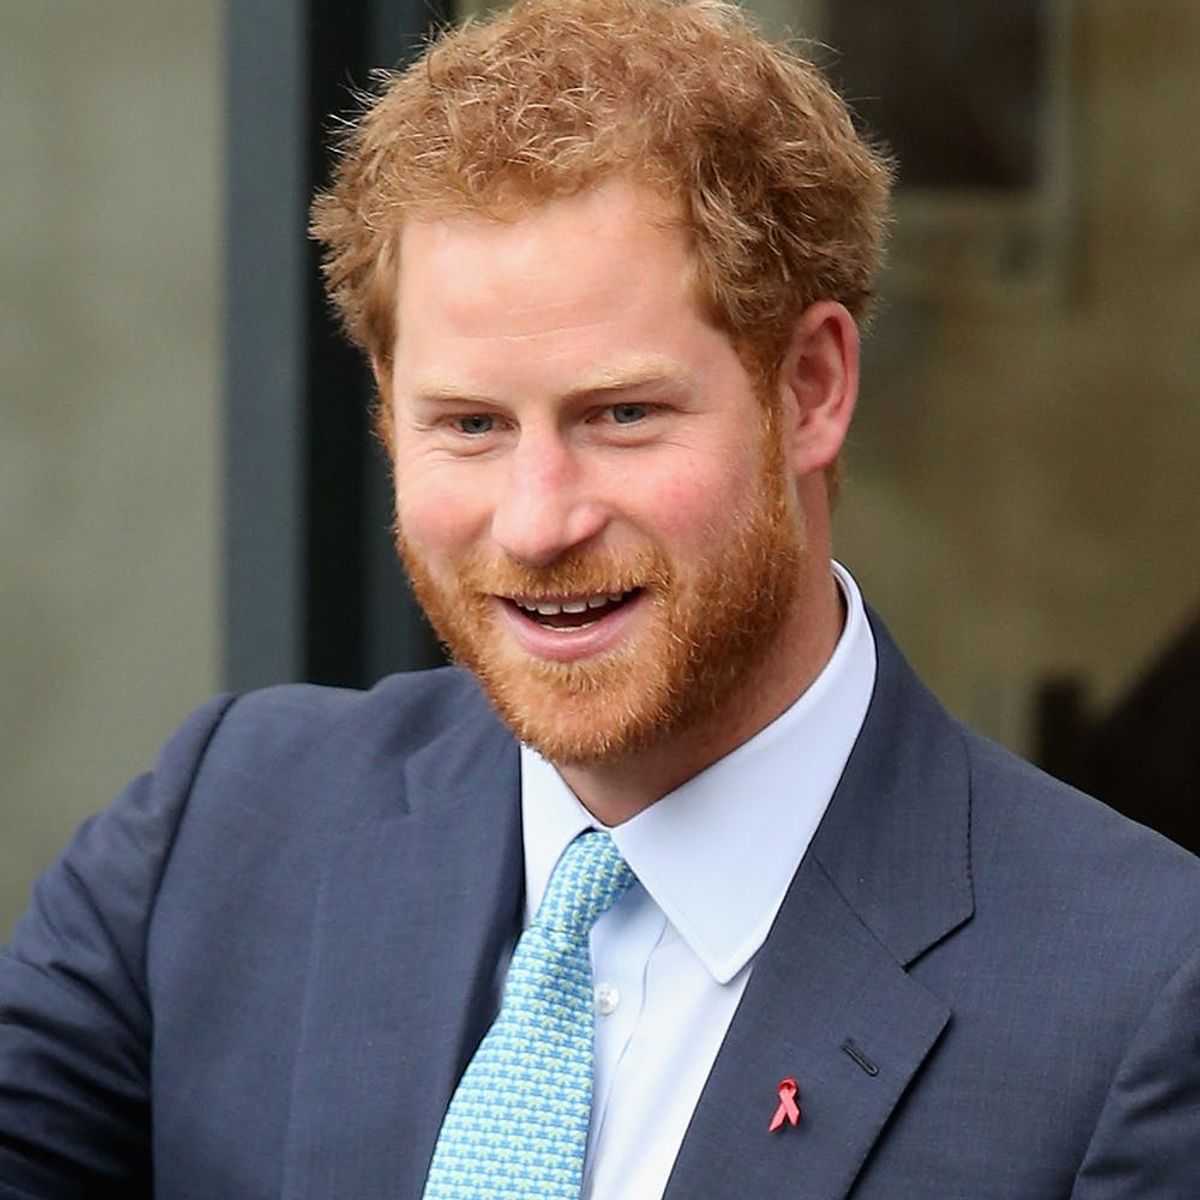 Prince Harry Just Released His Christmas Card and It Will Make You Love Him Even More